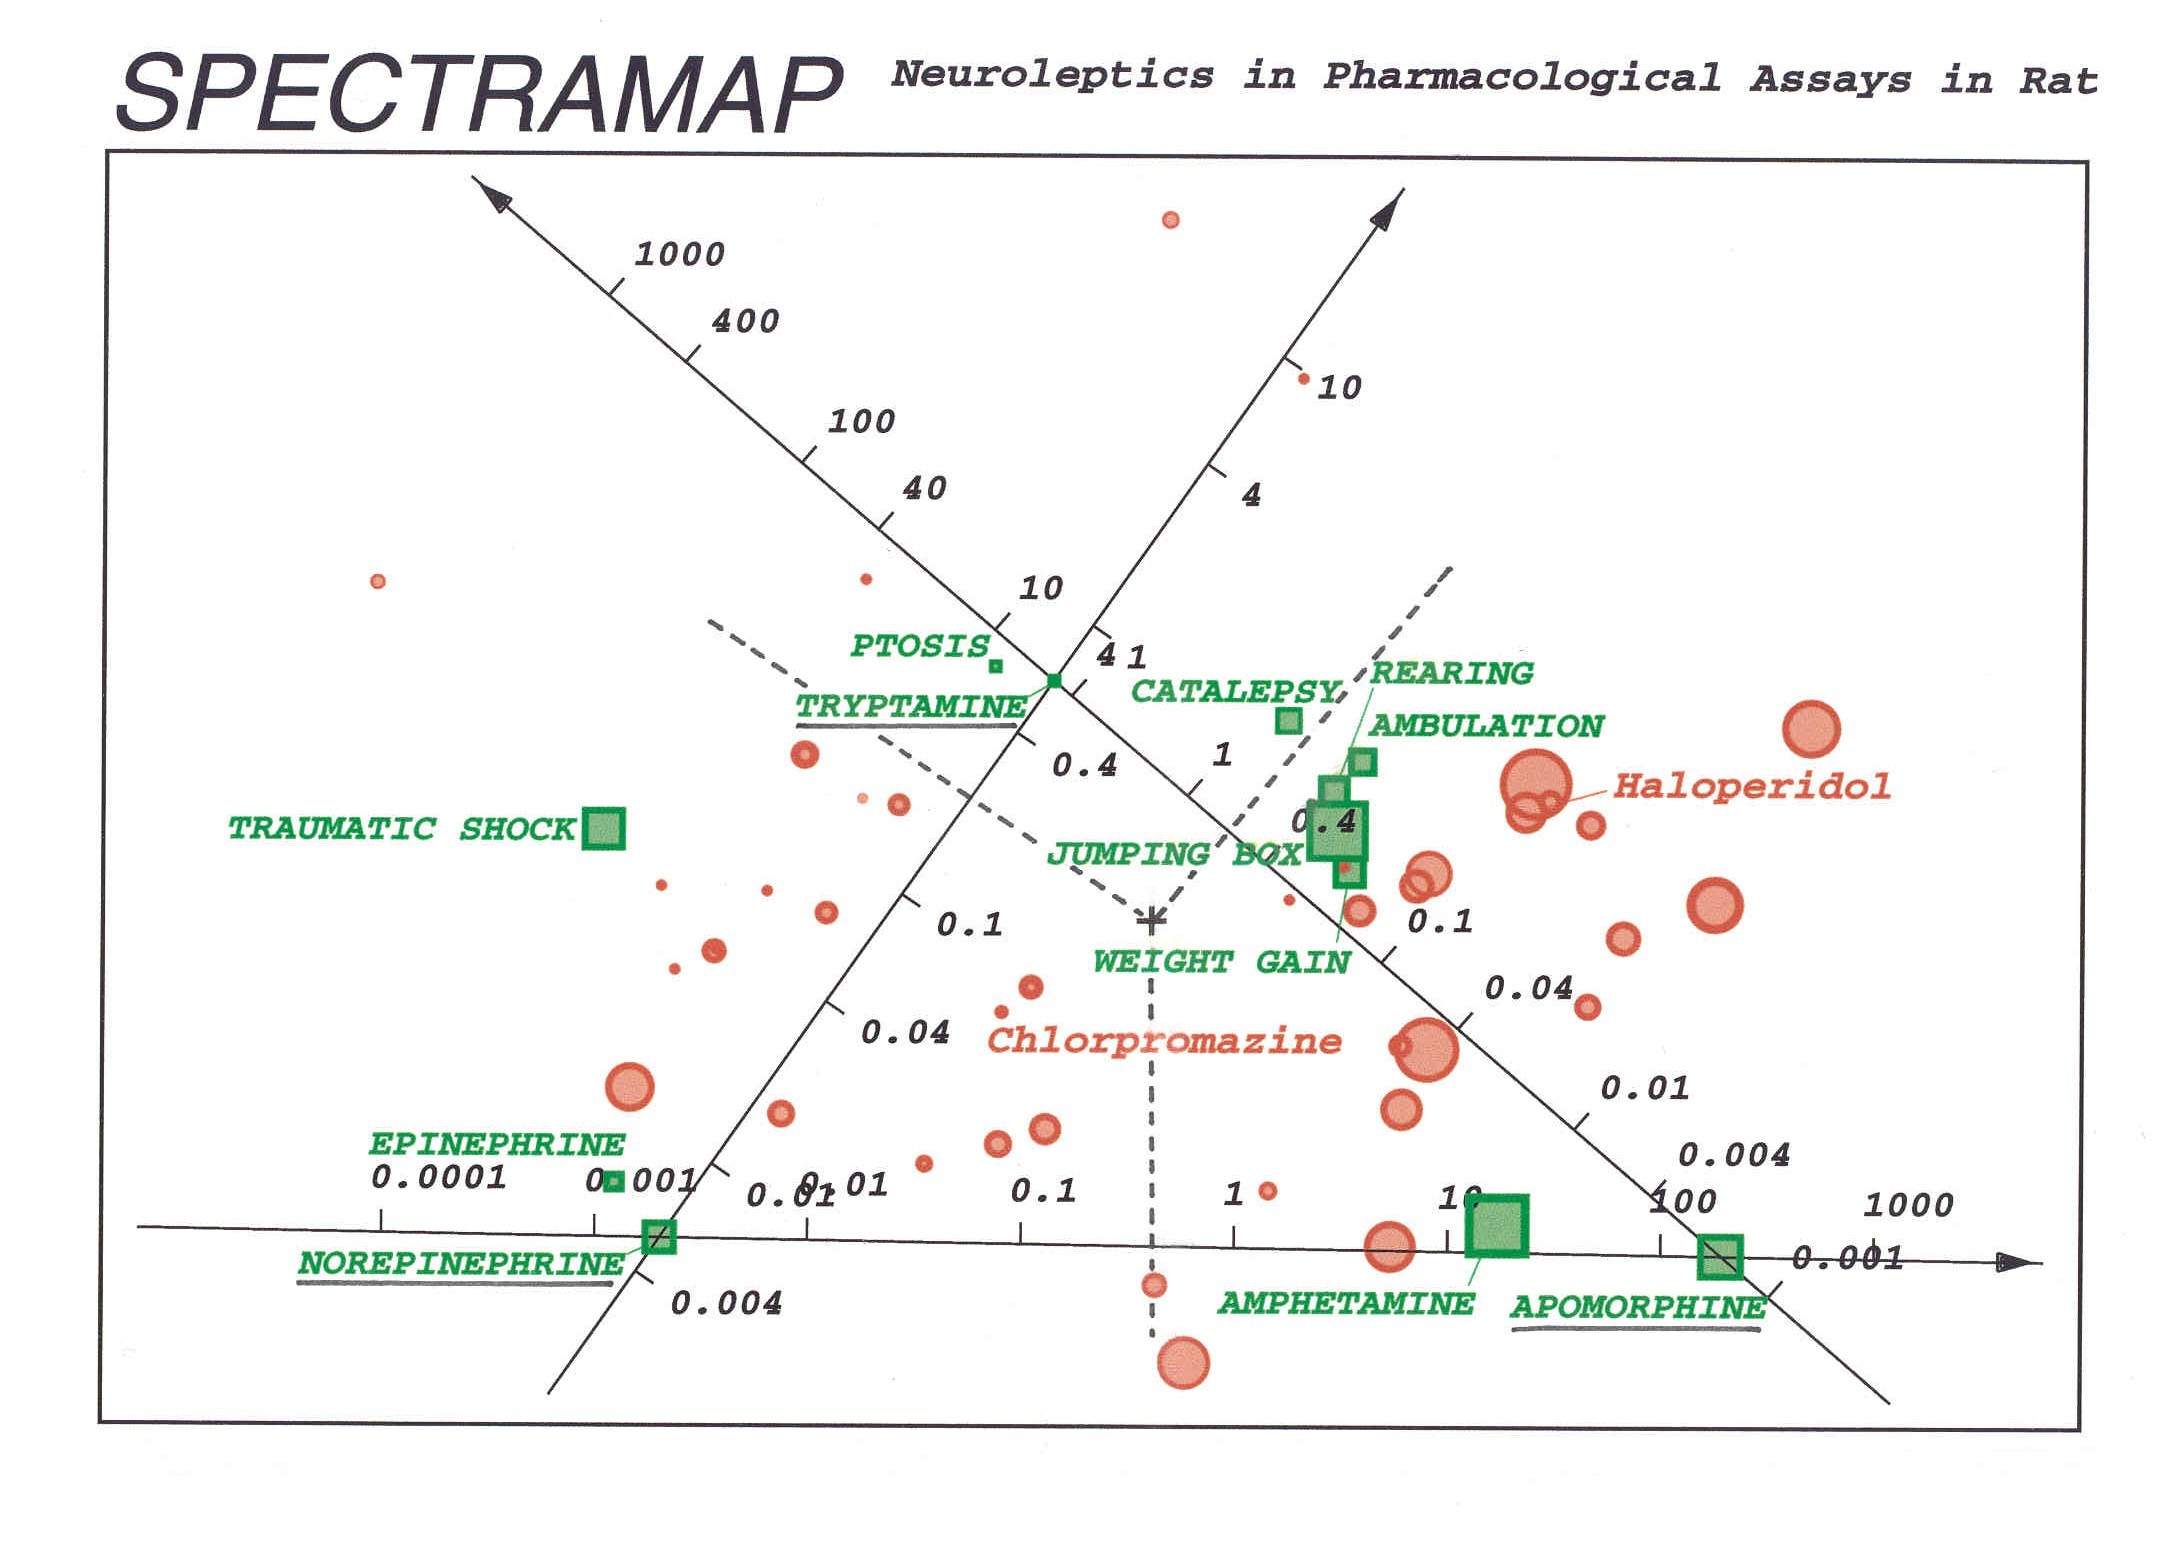 Spectral map of 45 neuroleptic (antipsychotic) compounds in 12 pharmacological tests in rats. Red circles denote compounds and green squares represent tests. The most polarizing tests are apomorphine, epinephrine and tryptamine. (Spectramap is a trademark of Coloritto BV.)